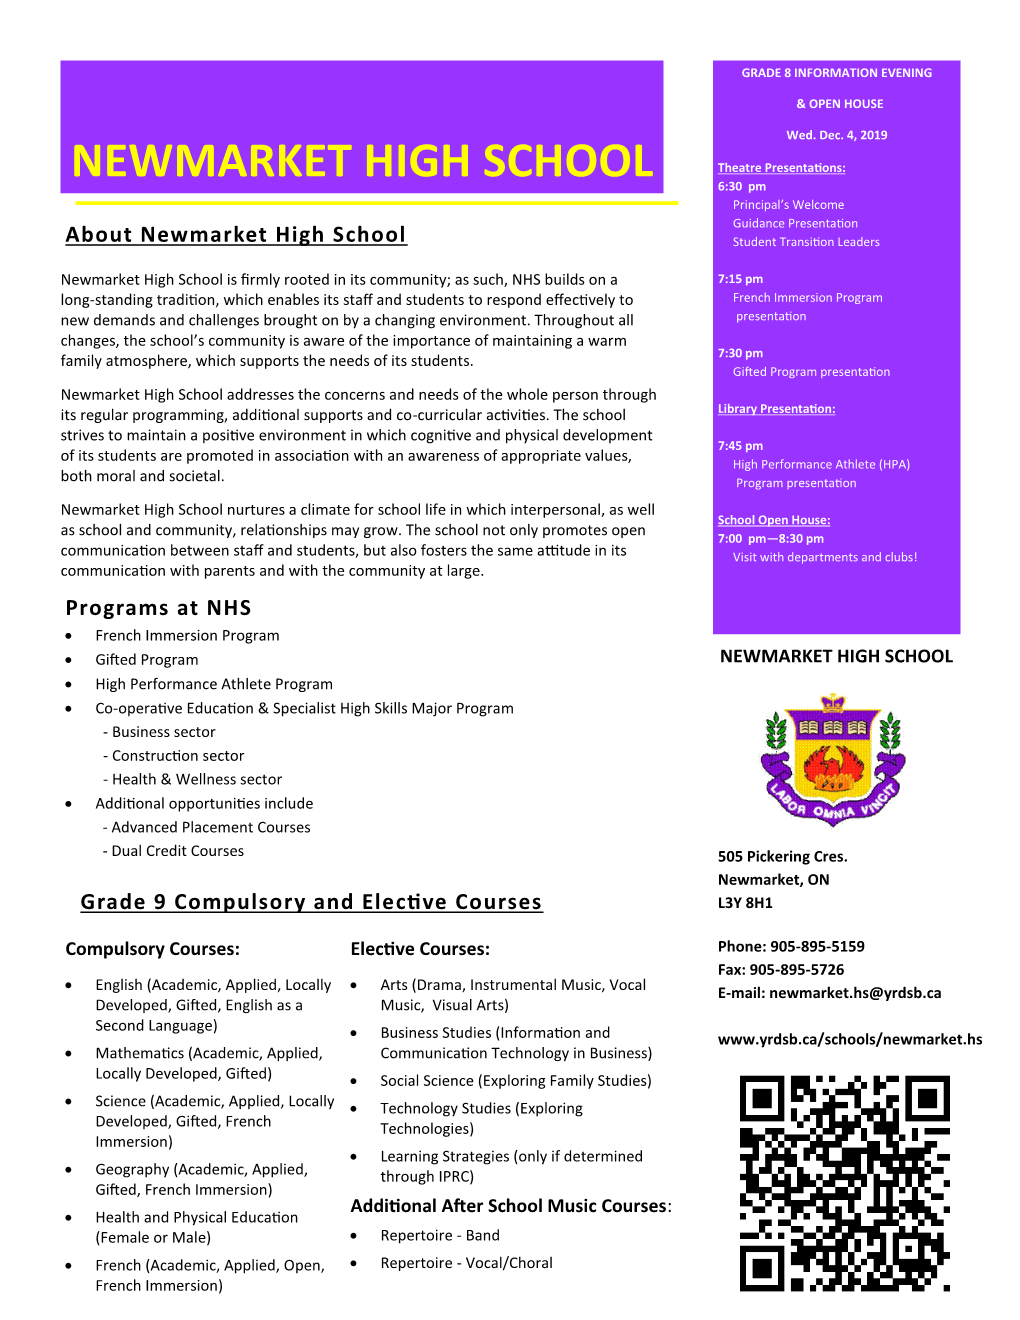 NEWMARKET HIGH SCHOOL Theatre Presentations: 6:30 Pm Principal’S Welcome Guidance Presentation About Newmarket High School Student Transition Leaders